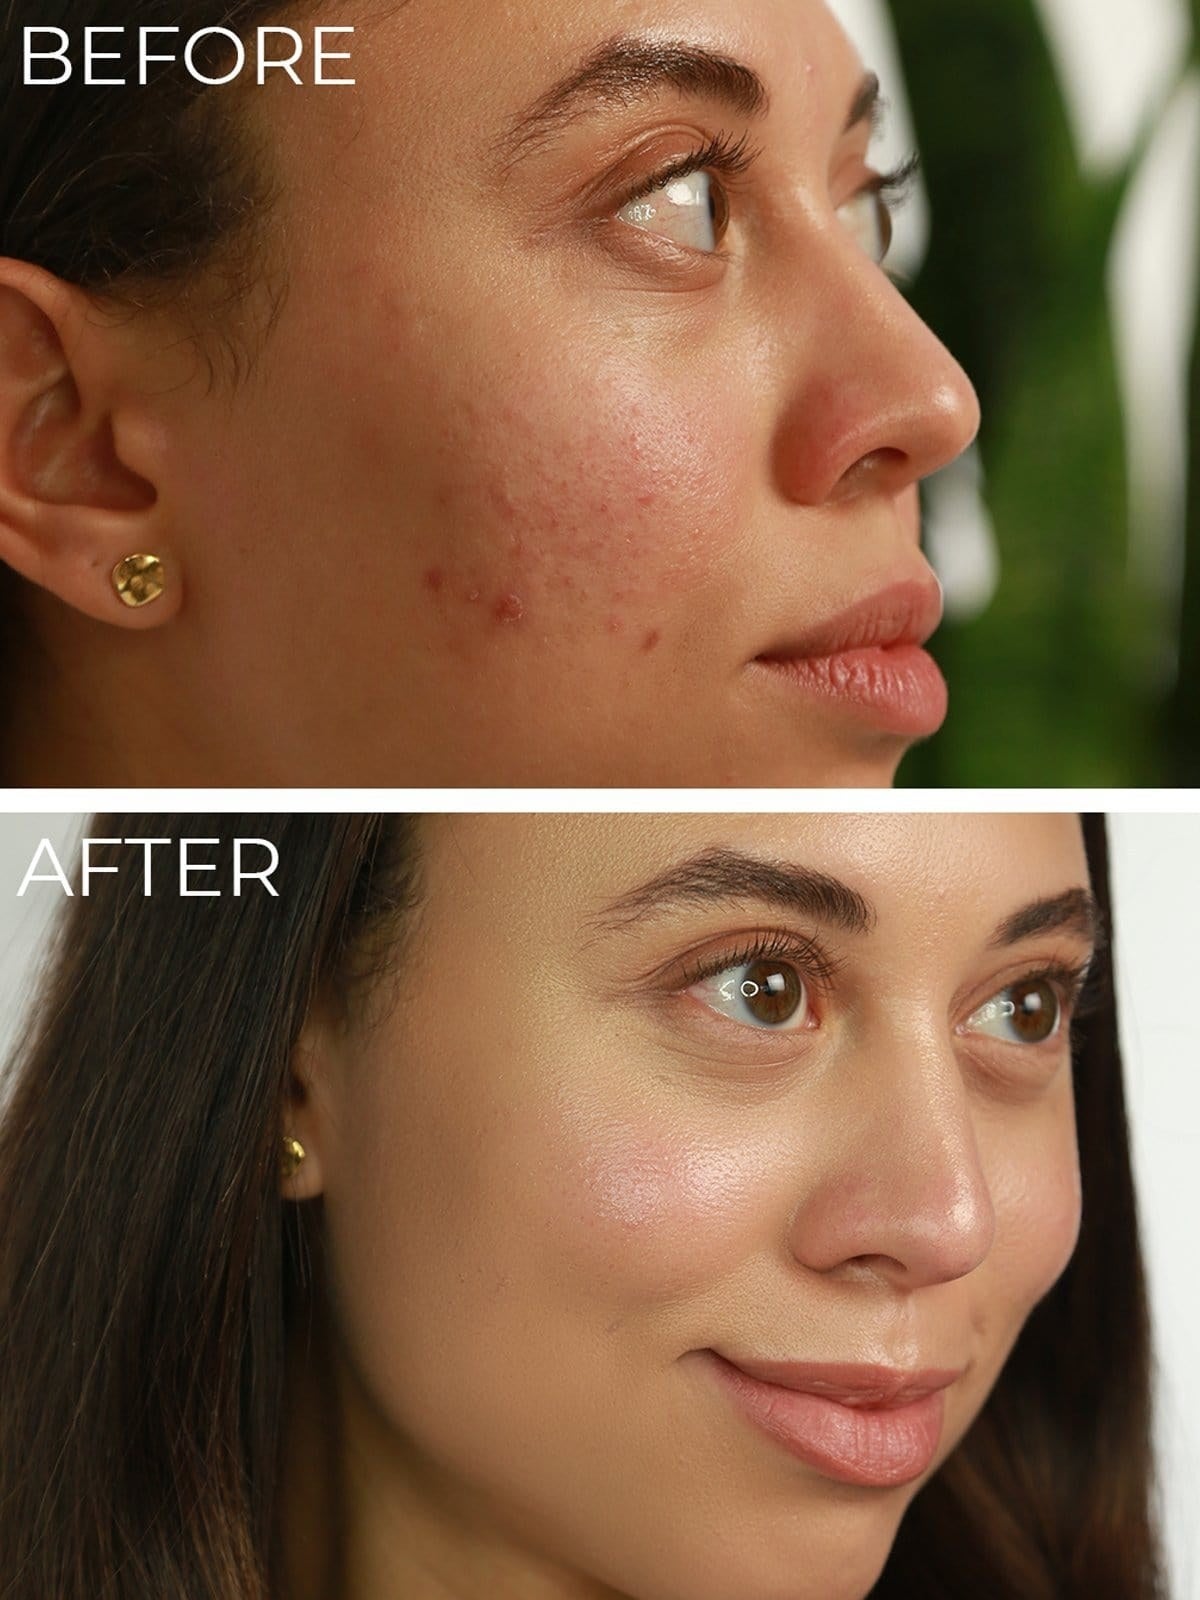 on the top, a reviewer with acne and redness on their cheeks and, on the bottom, the same reviewer with their skin now clear